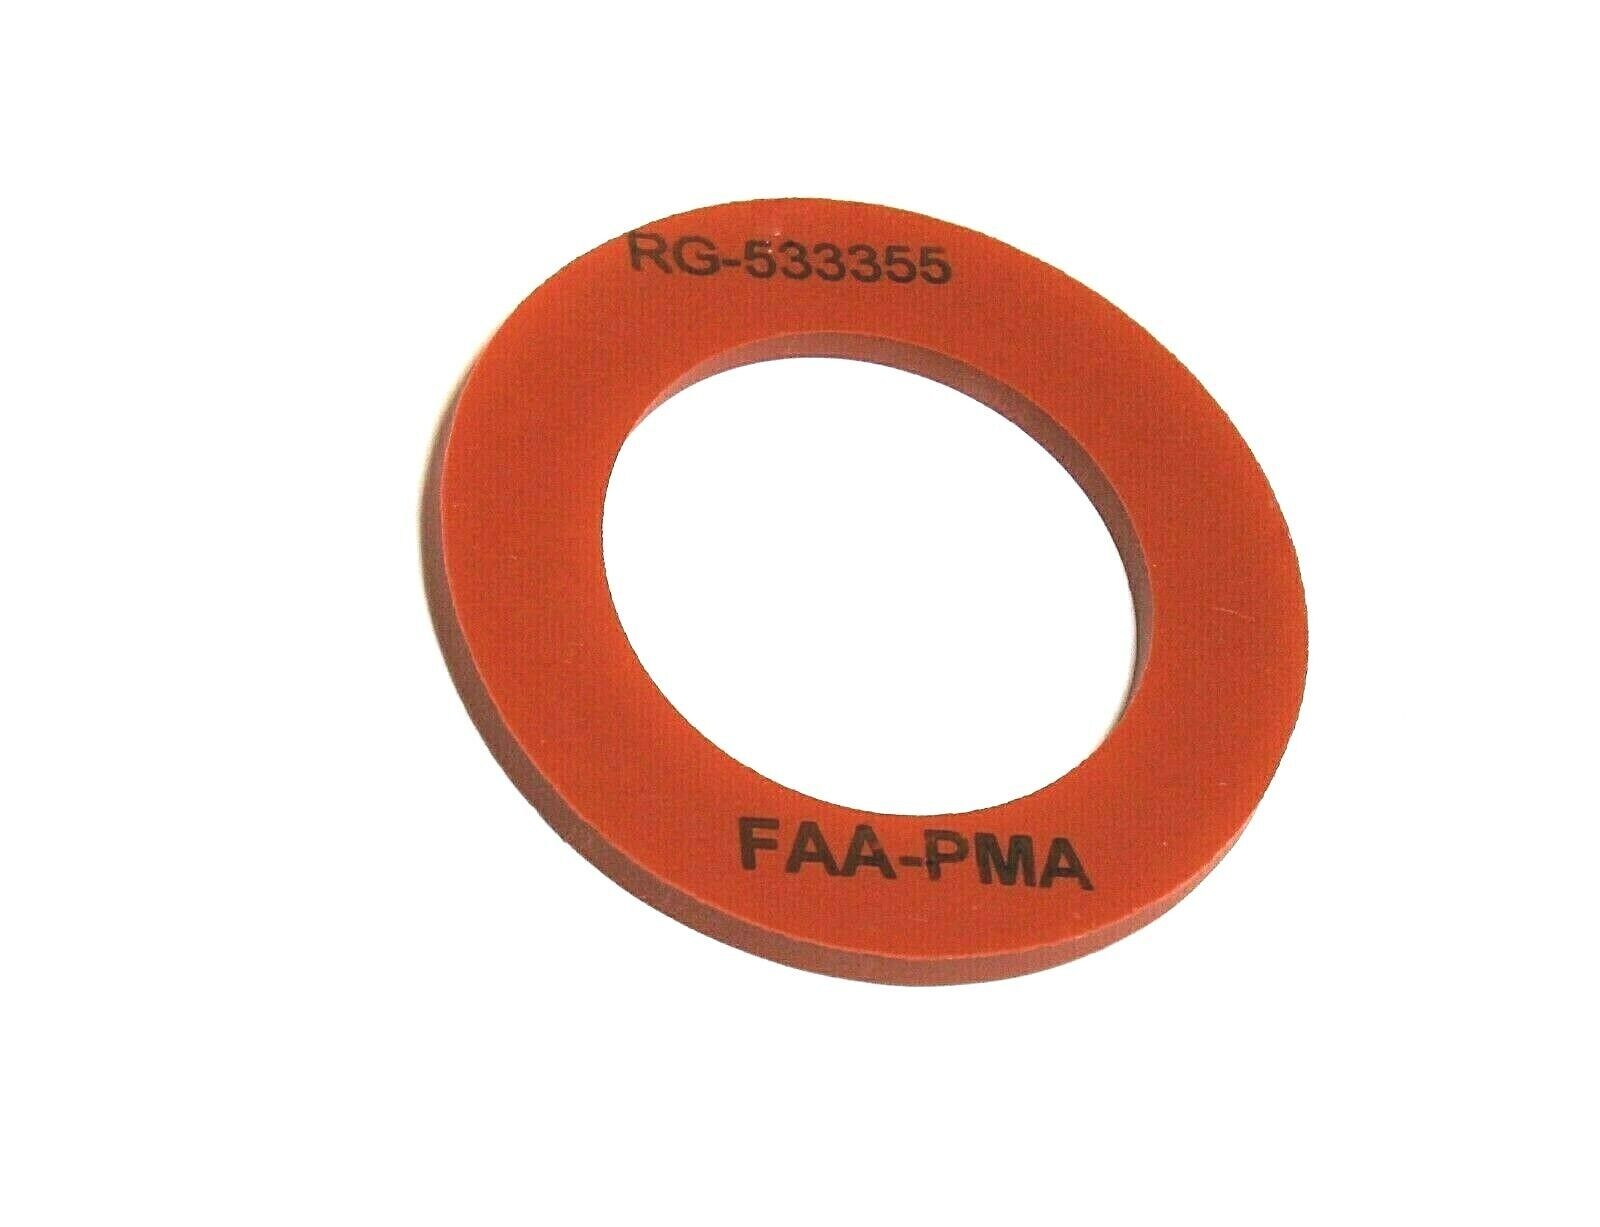 CONTINENTAL Oil Filler Cap Gasket - A-65,-75; C-85-90, O-200 and more, # 533355 